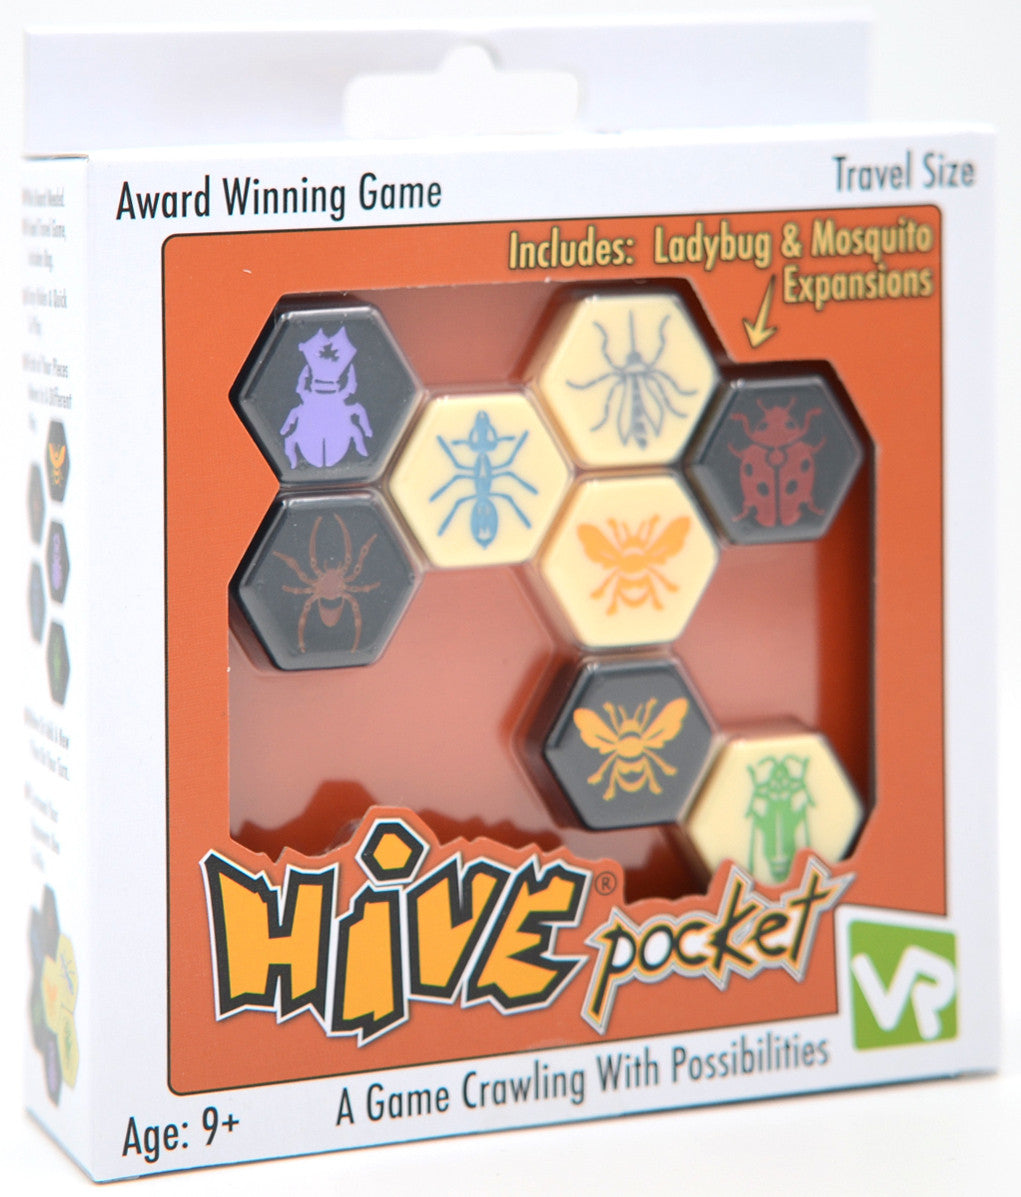 Hive Pocket - A Game Crawling with Possibilities Bug Game